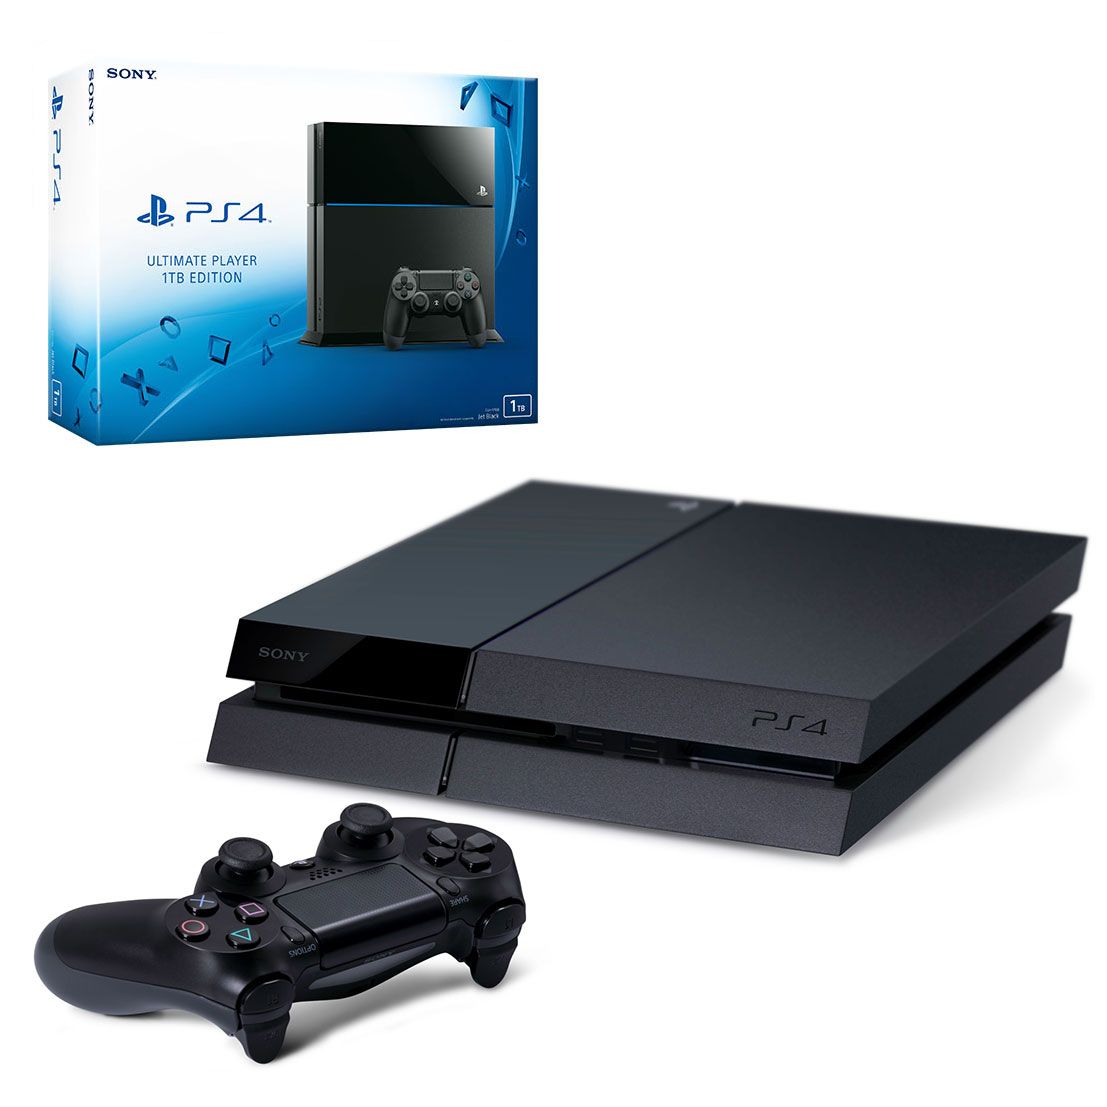 PlayStation 4 Ultimate Player 1TB Edition Console (Black)